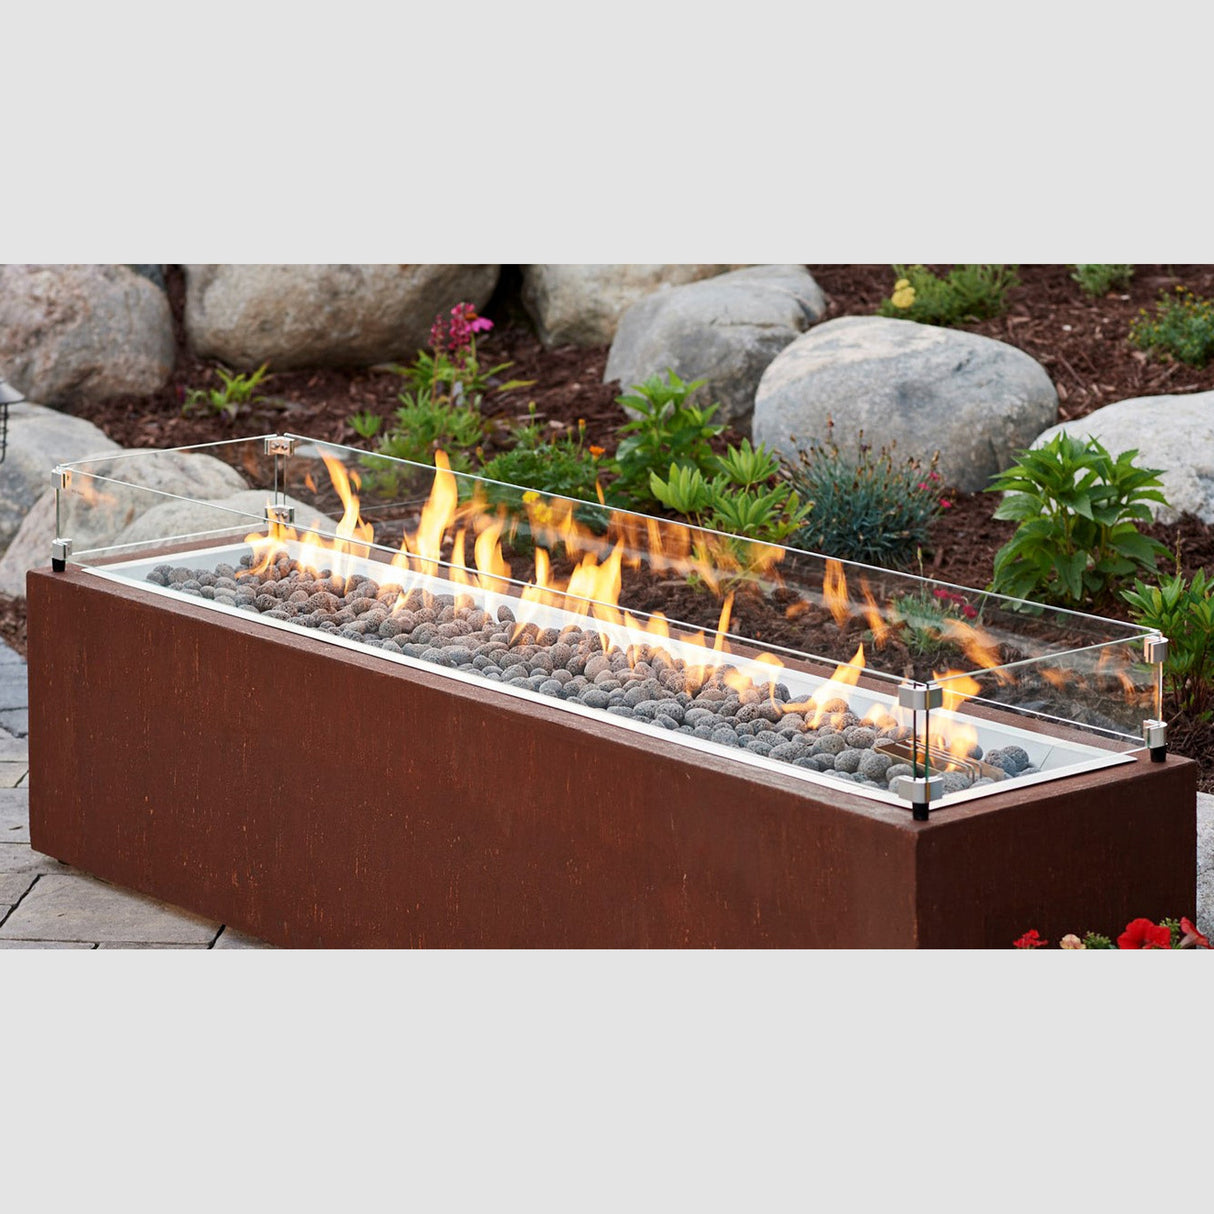 The Linear Glass Wind Guard being used in a patio setting to protect the flame from the burner